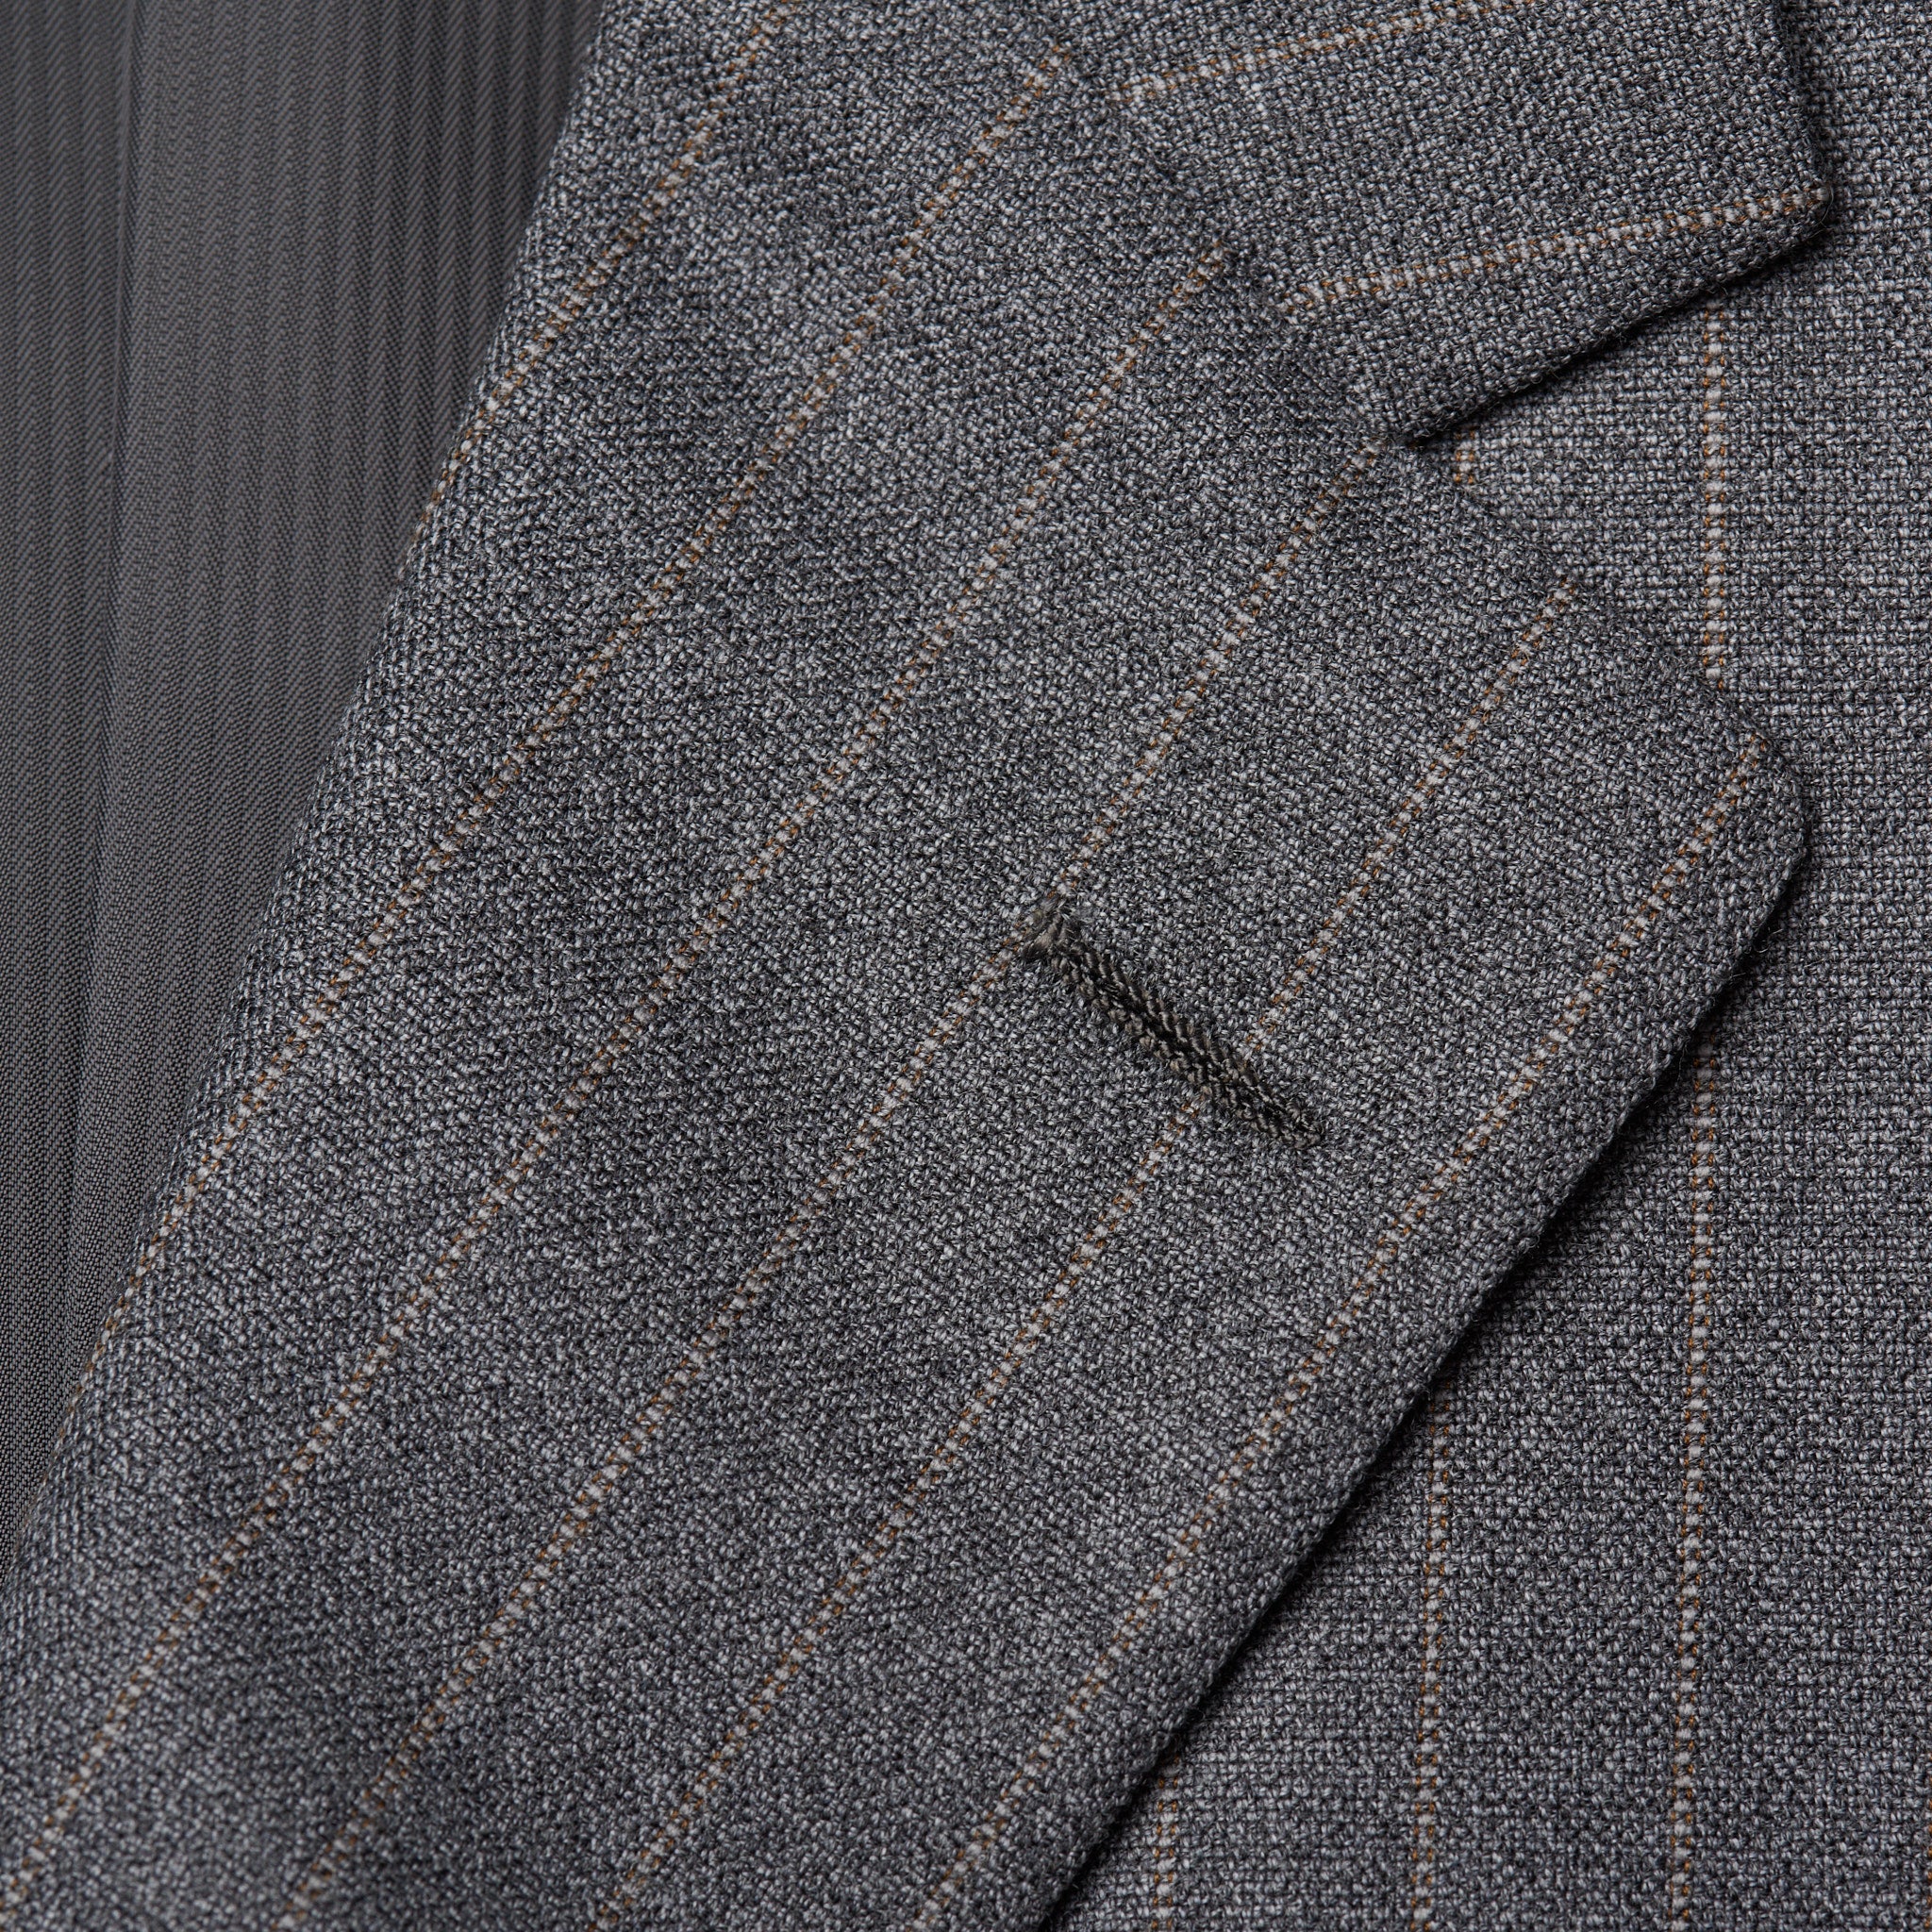 D'AVENZA Roma Handmade Gray Striped Wool Business Suit NEW – SARTORIALE